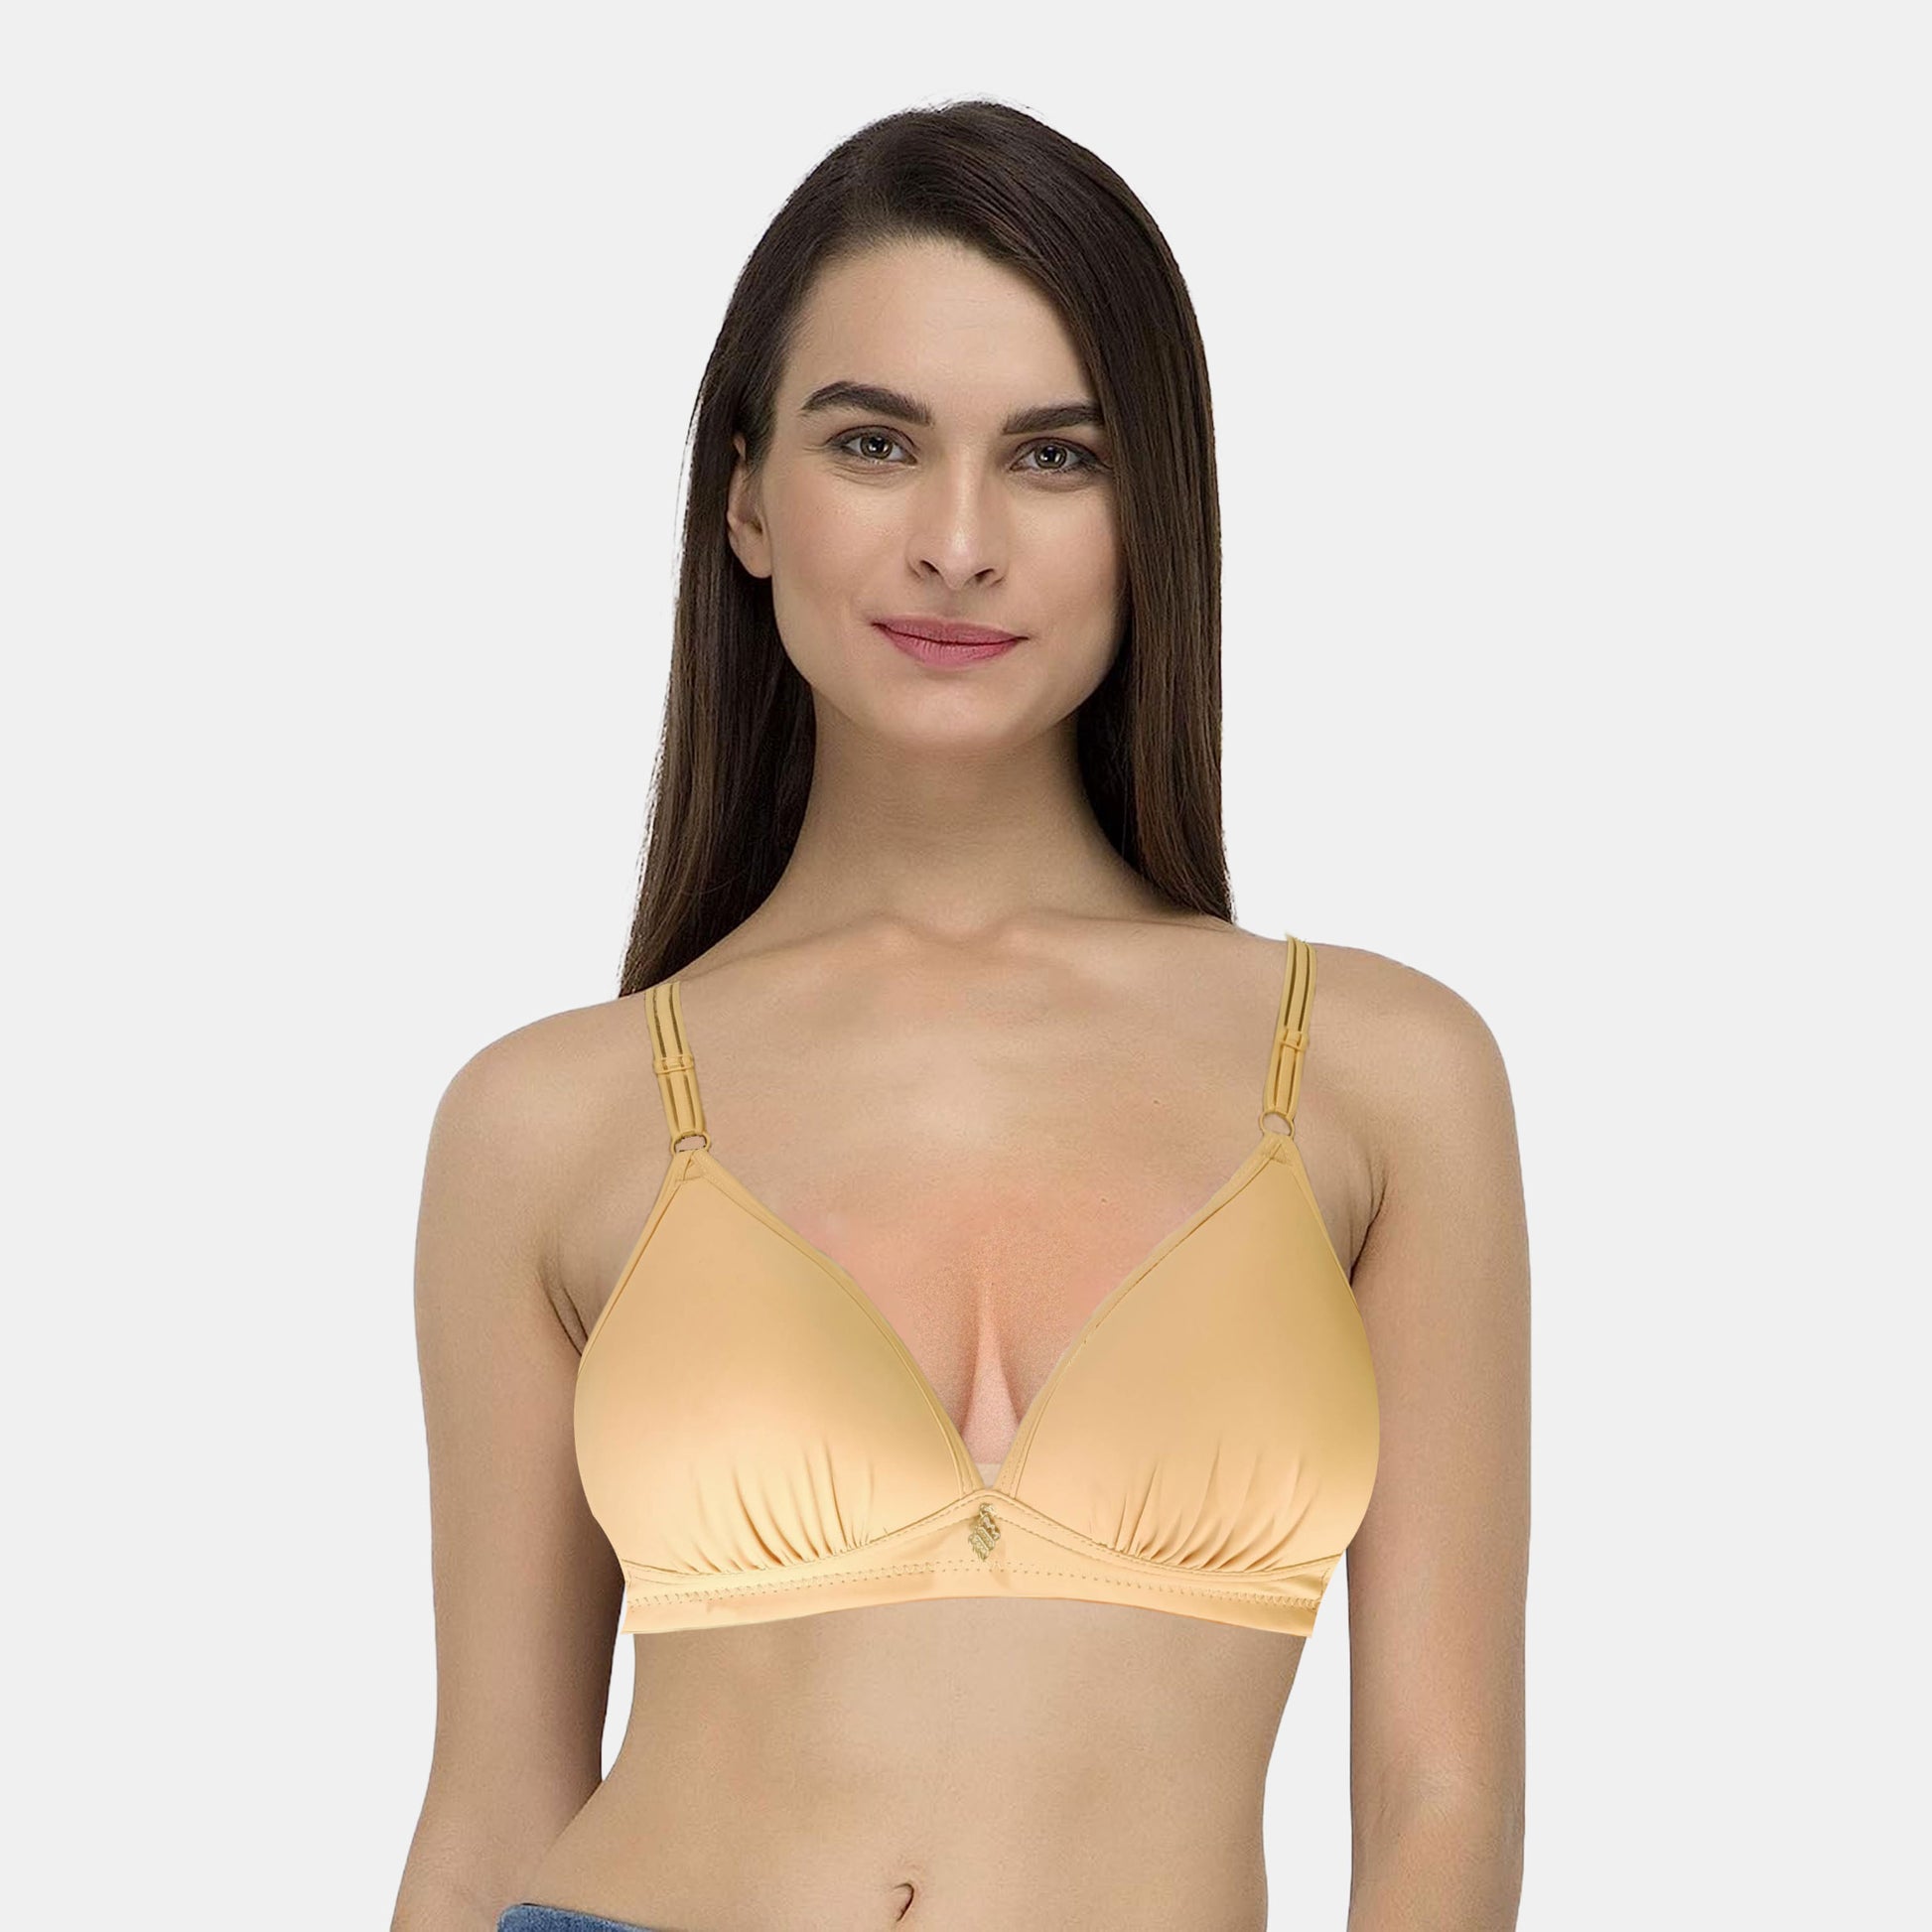 Yidaili Comfort Fit Wire-Free Padded Bra - Supportive and Stylish